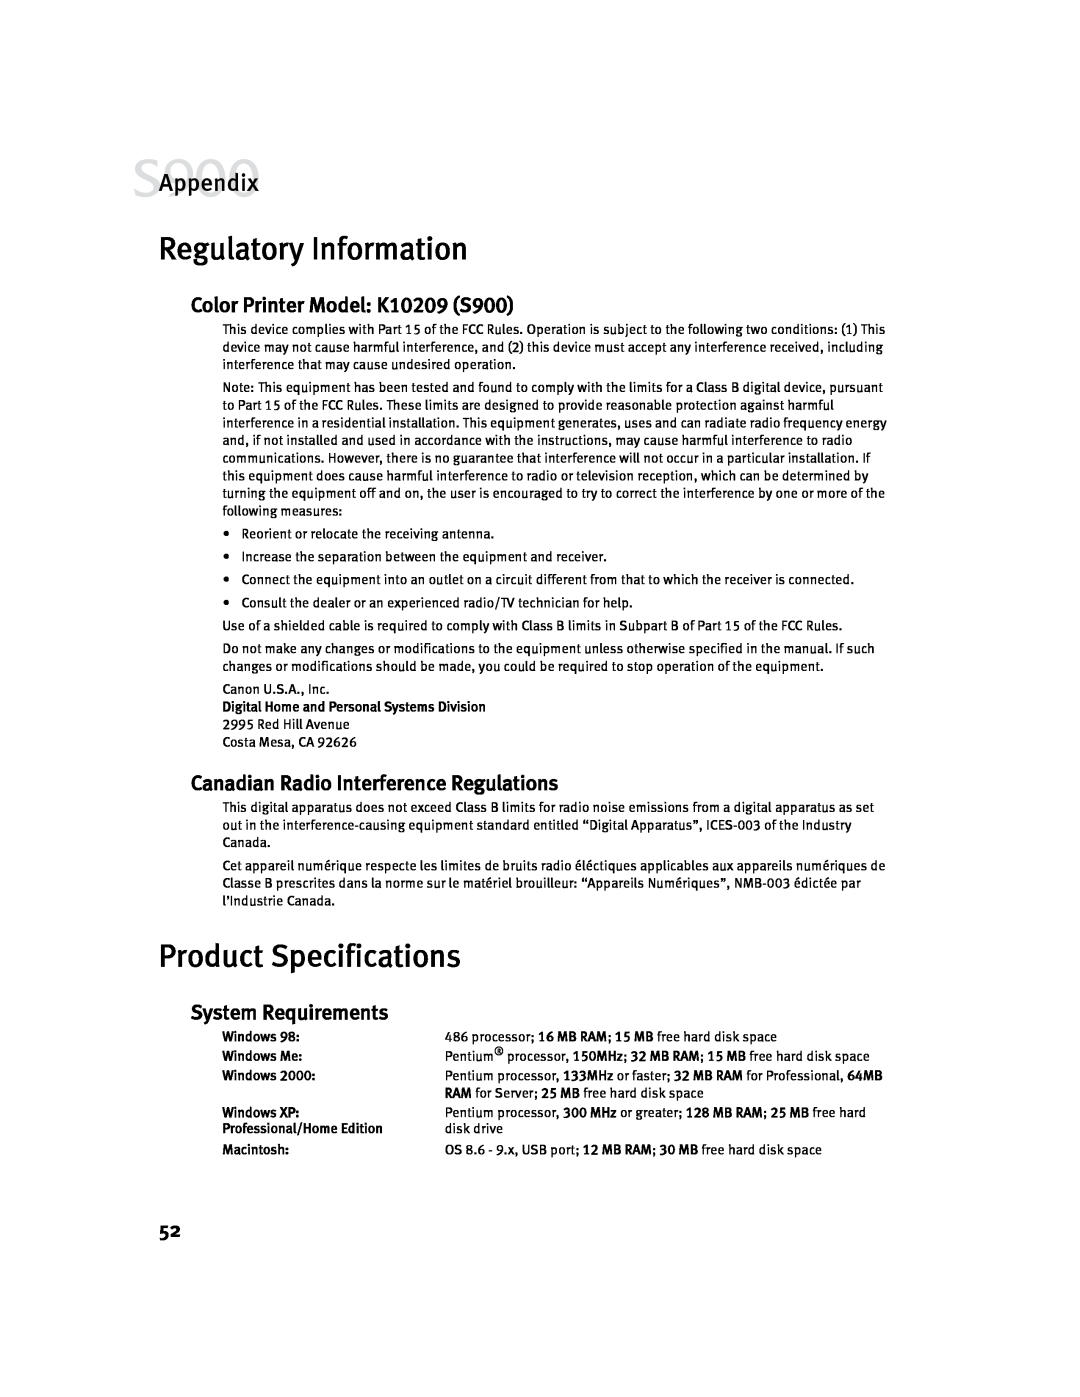 Canon Regulatory Information, Product Specifications, Color Printer Model K10209 S900, System Requirements, Appendix 